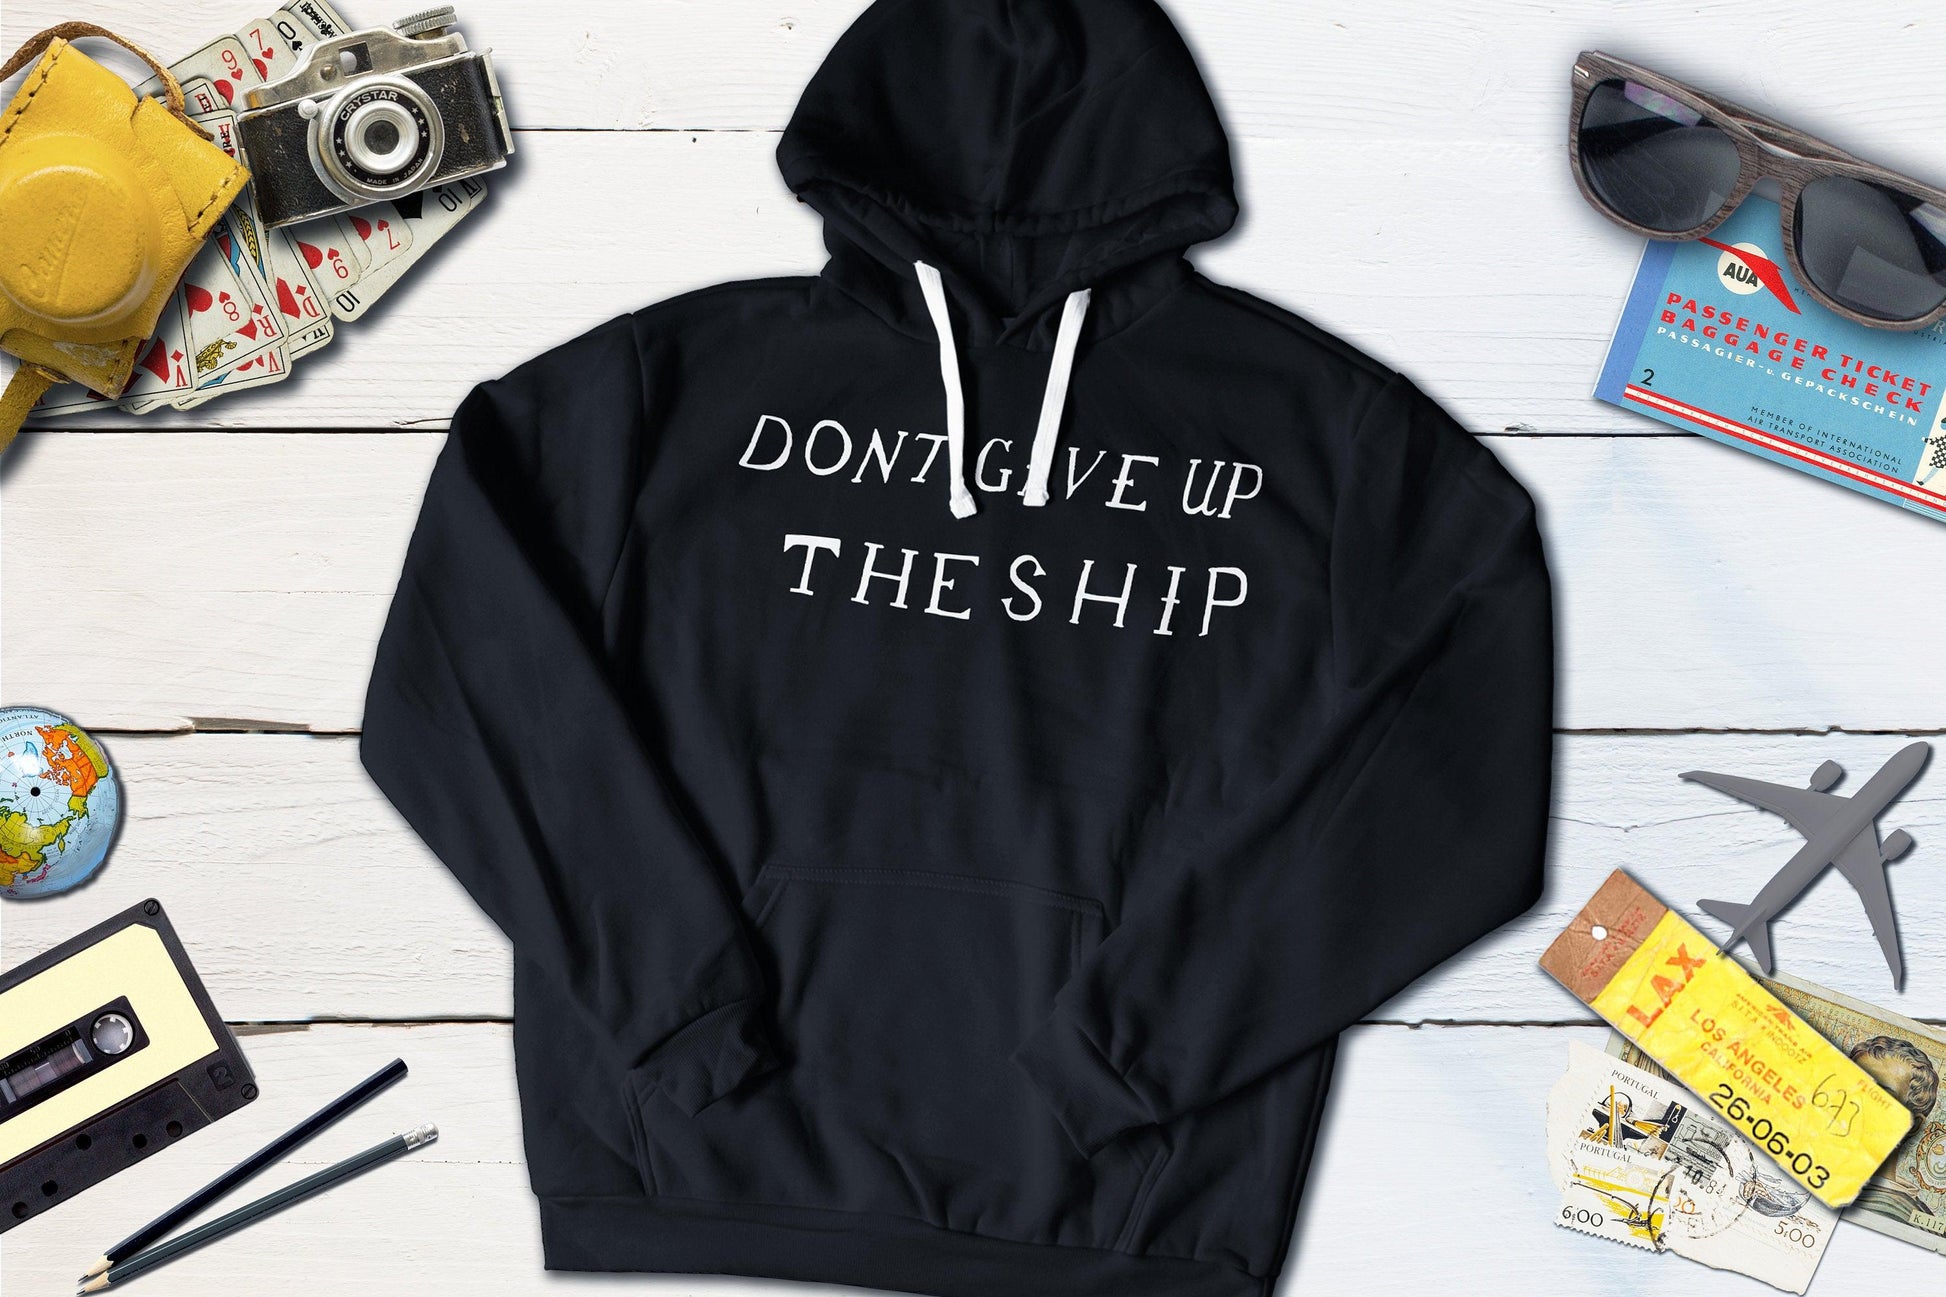 Don't Give Up The Ship Commodore Perry Battle Flag War of 1812-Hooded Sweatshirt-Yesteeyear